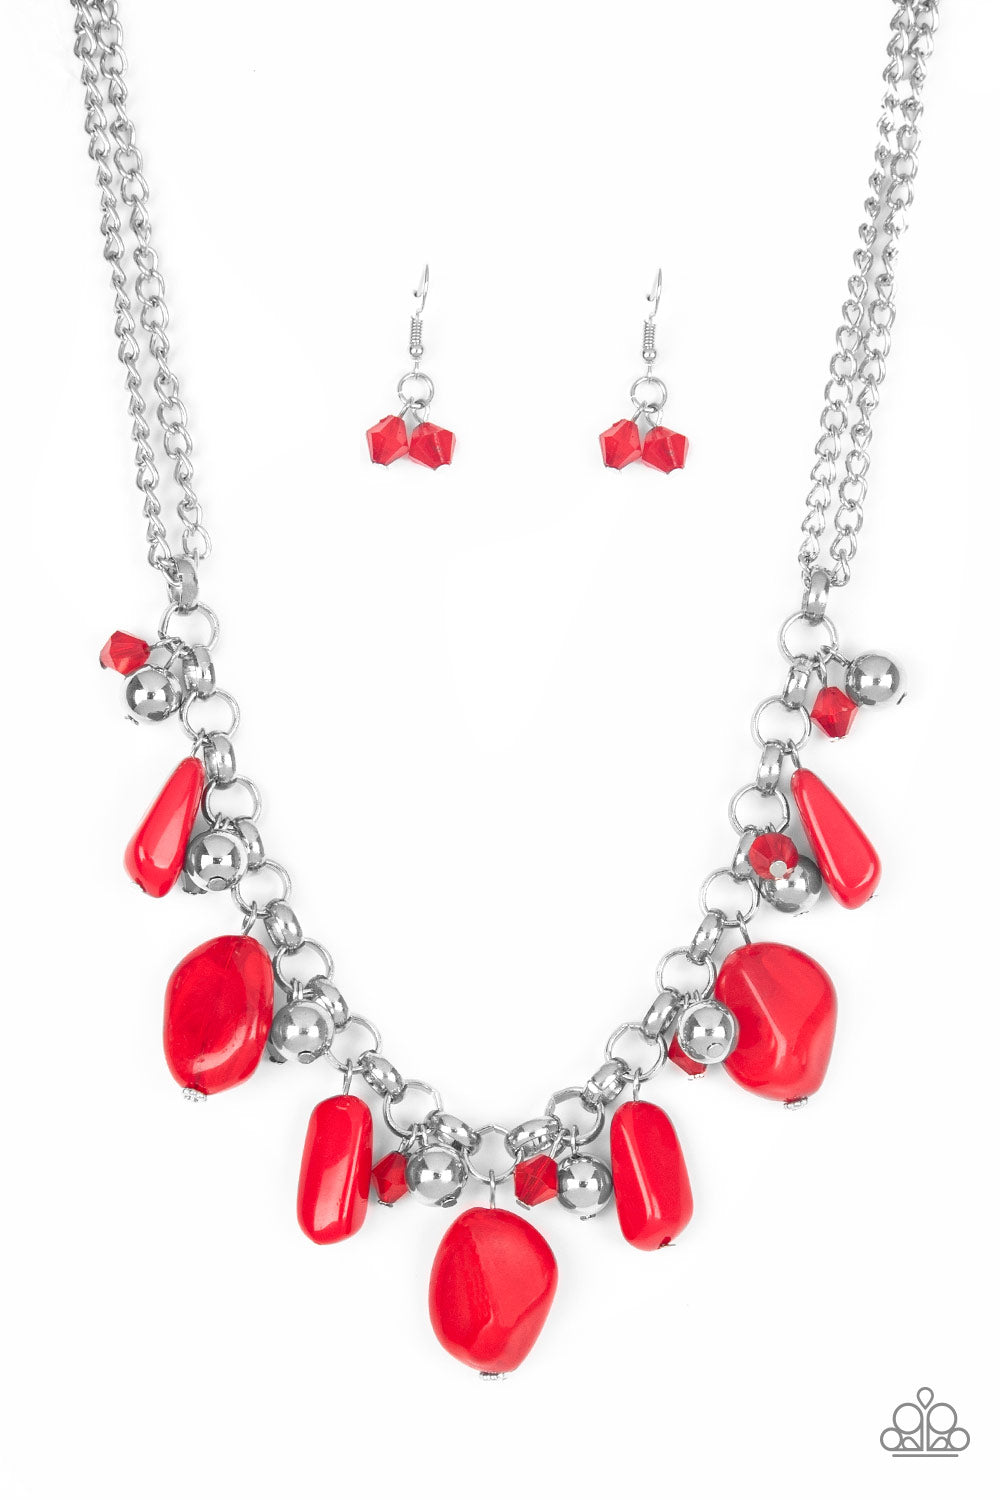 Paparazzi necklace - Grand Canyon Grotto - Red